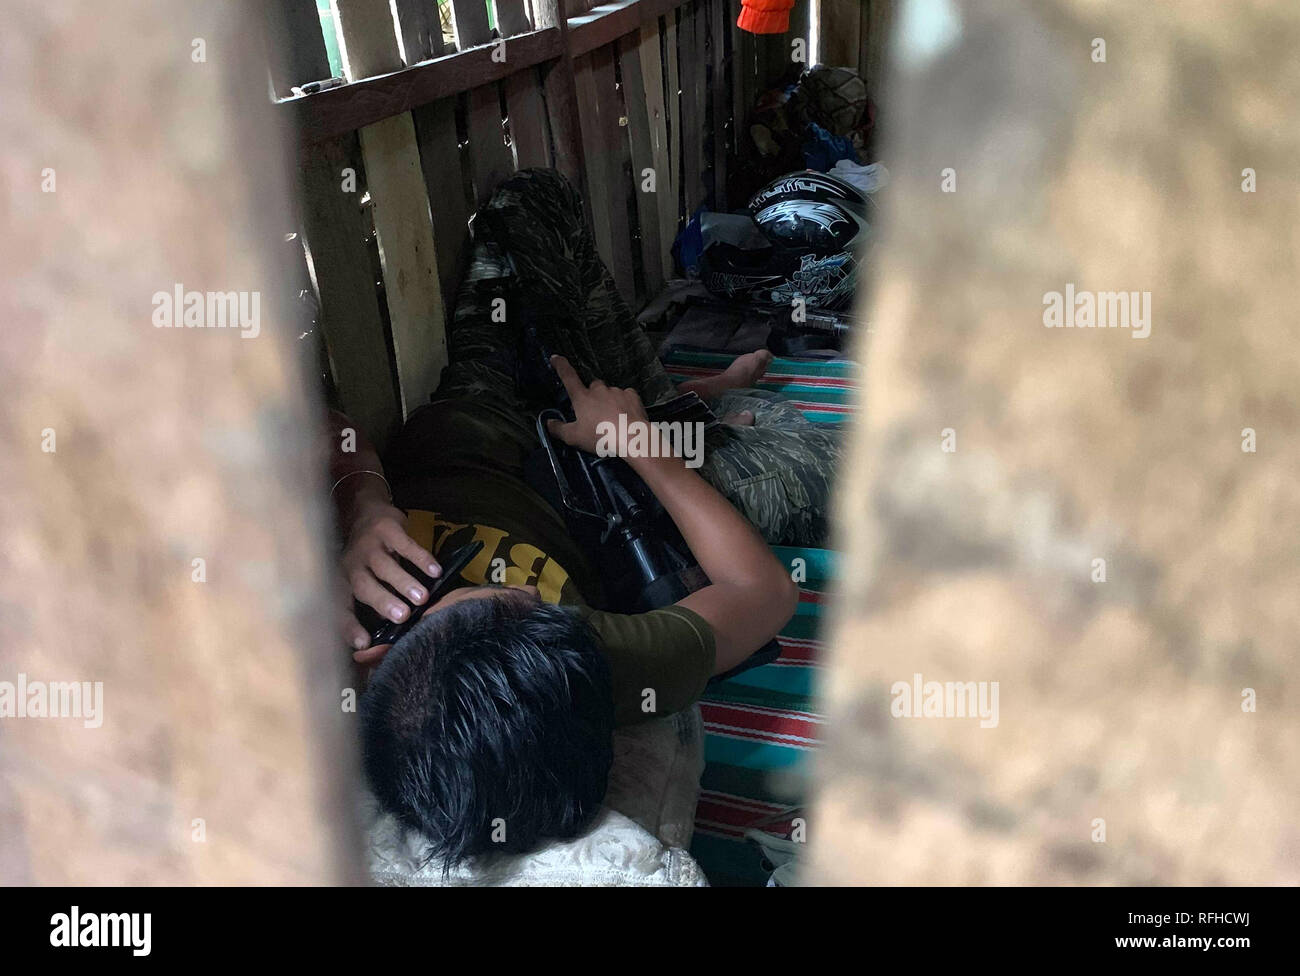 Maguindanao, Philippines. 26th January 2019. A Filipino Muslim rebel is seen inside their detachment in Sultan Kudarat town in Maguindanao in the southern Philippines, Saturday, January 26, 2019 as the Comelec announced Bangsamoro Organic Law (BOL) was “deemed ratified,” as officials released figures showing that more than 1.5 million registered voters had cast “yes” ballots for the law’s ratification versus nearly 200,000 who had voted against it.  The law aims to give the impoverished south an expanded autonomous area. Credit: Jeoffrey Maitem/Alamy Live News Stock Photo